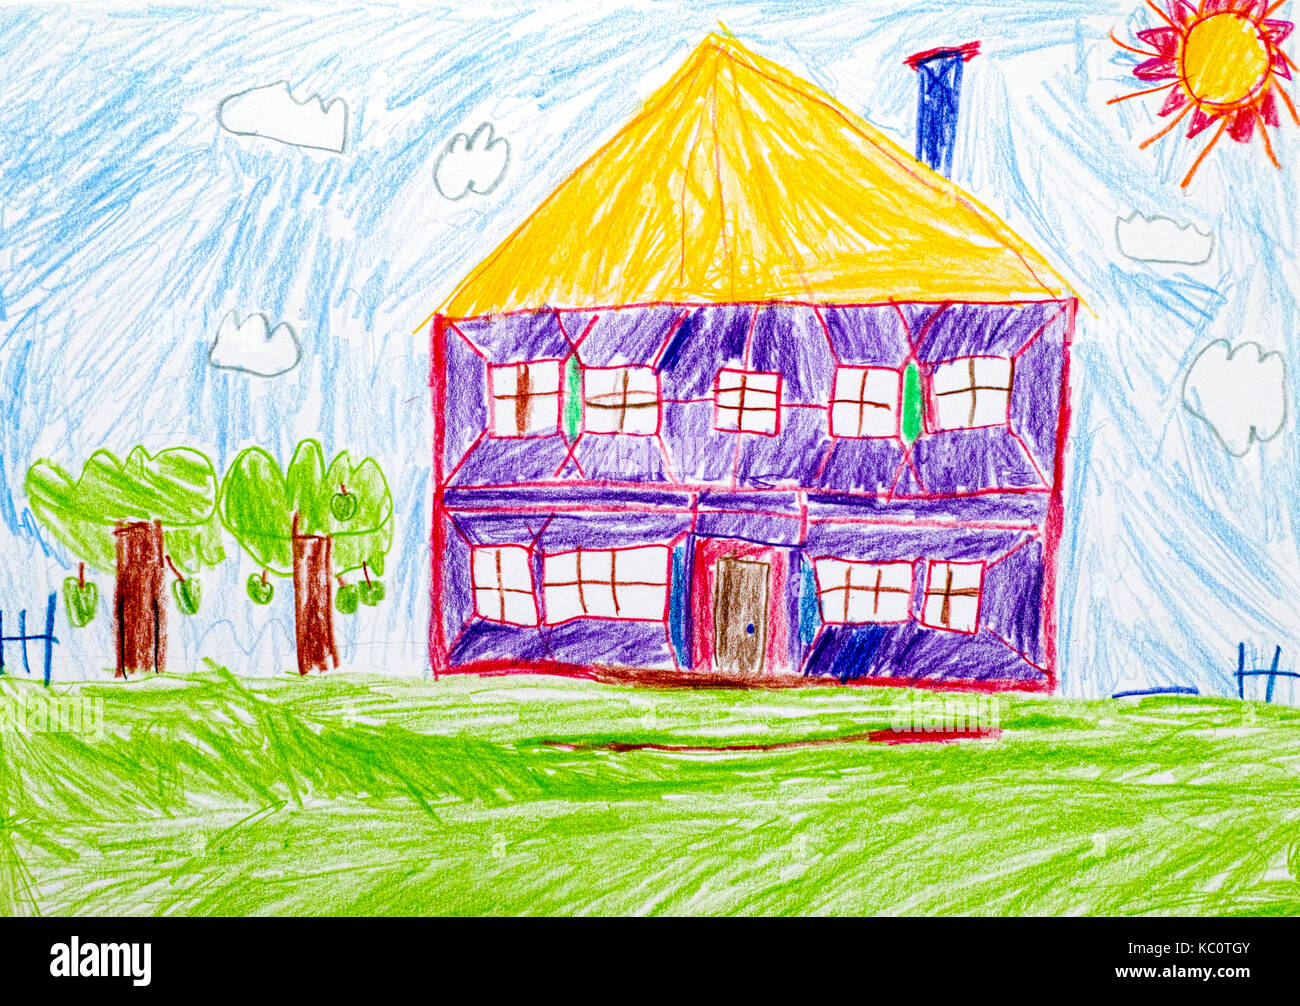 Child pencil hand drawing. Purple house with yellow roof,  apple trees, green grass and sun in blue sky. Stock Photo